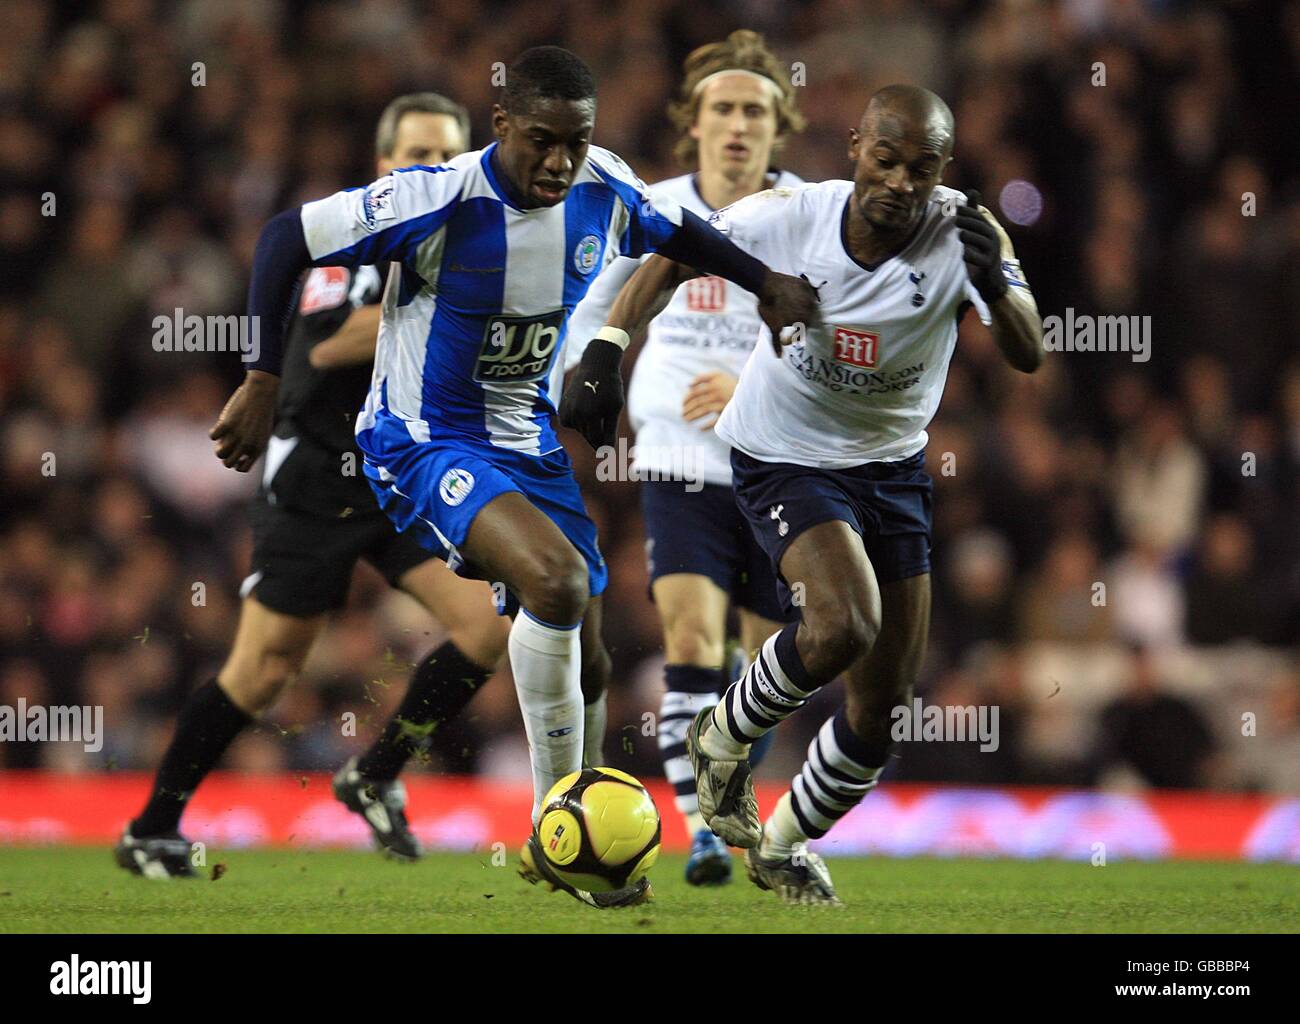 Soccer - FA Cup - Third Round - Tottenham Hotspur v Wigan Athletic - White Hart Lane. Tottenham Hotspur's Didier Zokora (left) and Wigan Athletic's Olivier Kapo battle for the ball. Stock Photo